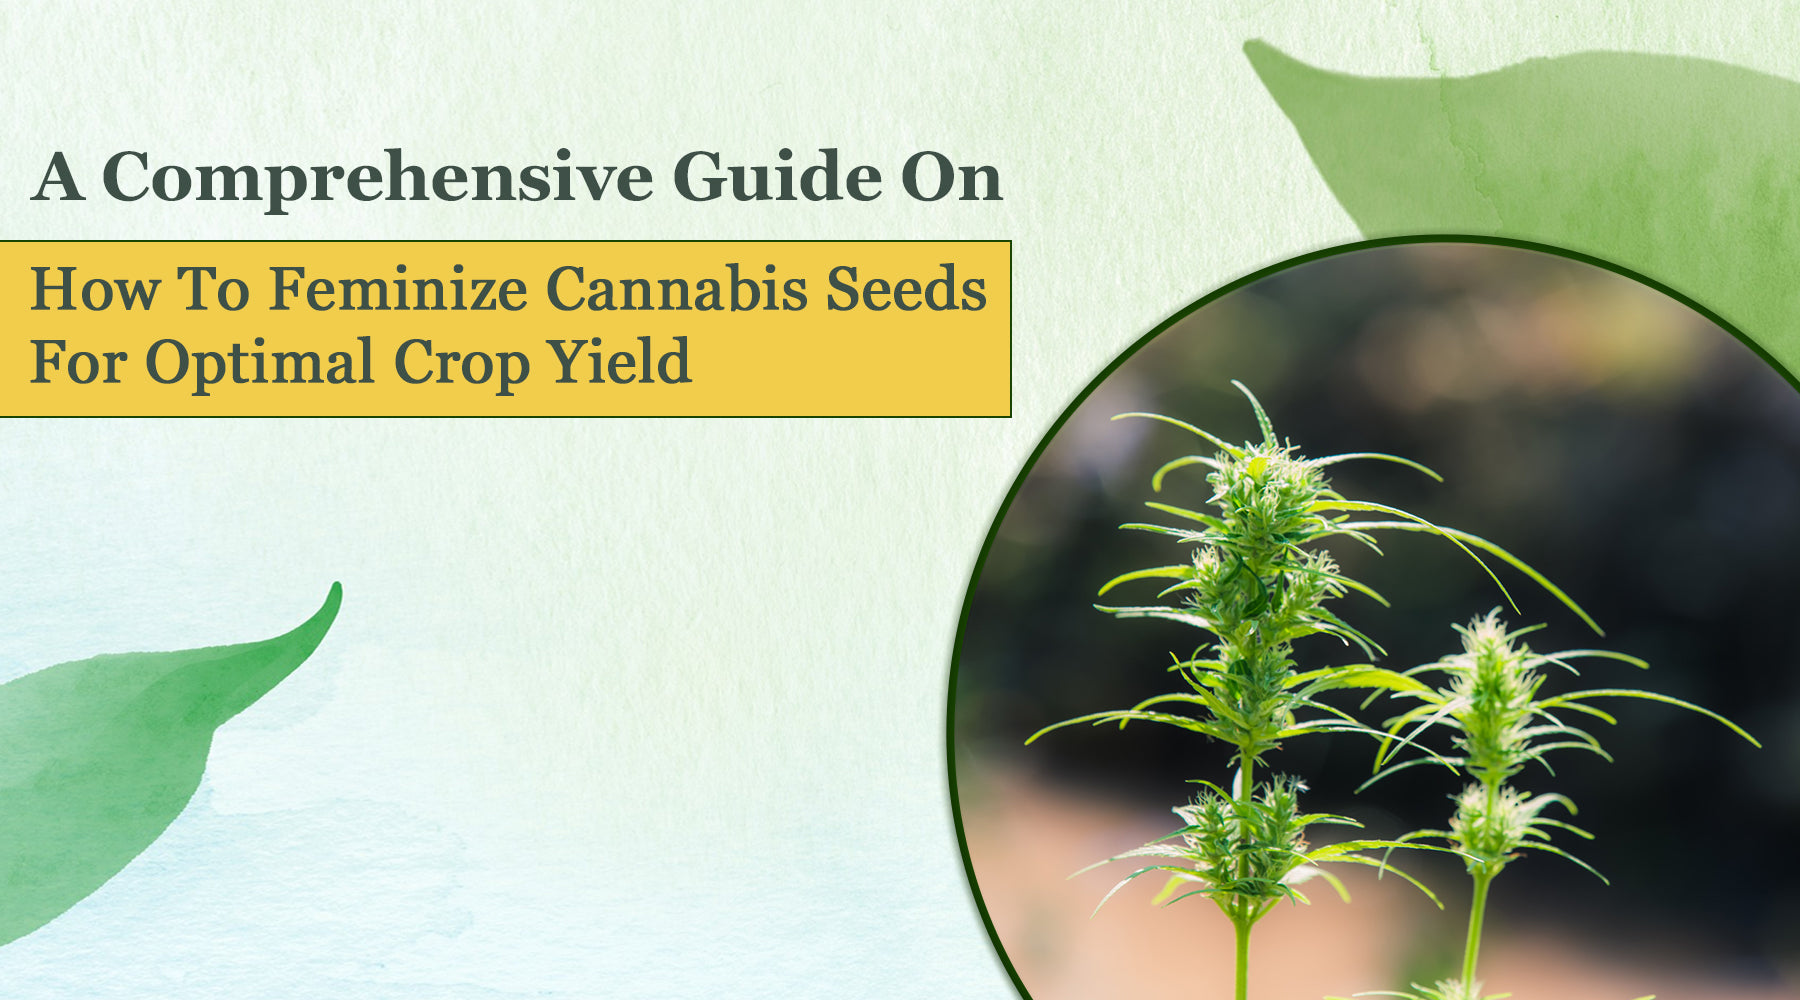 A Comprehensive Guide on How to Feminize Cannabis Seeds for Optimal Crop Yield